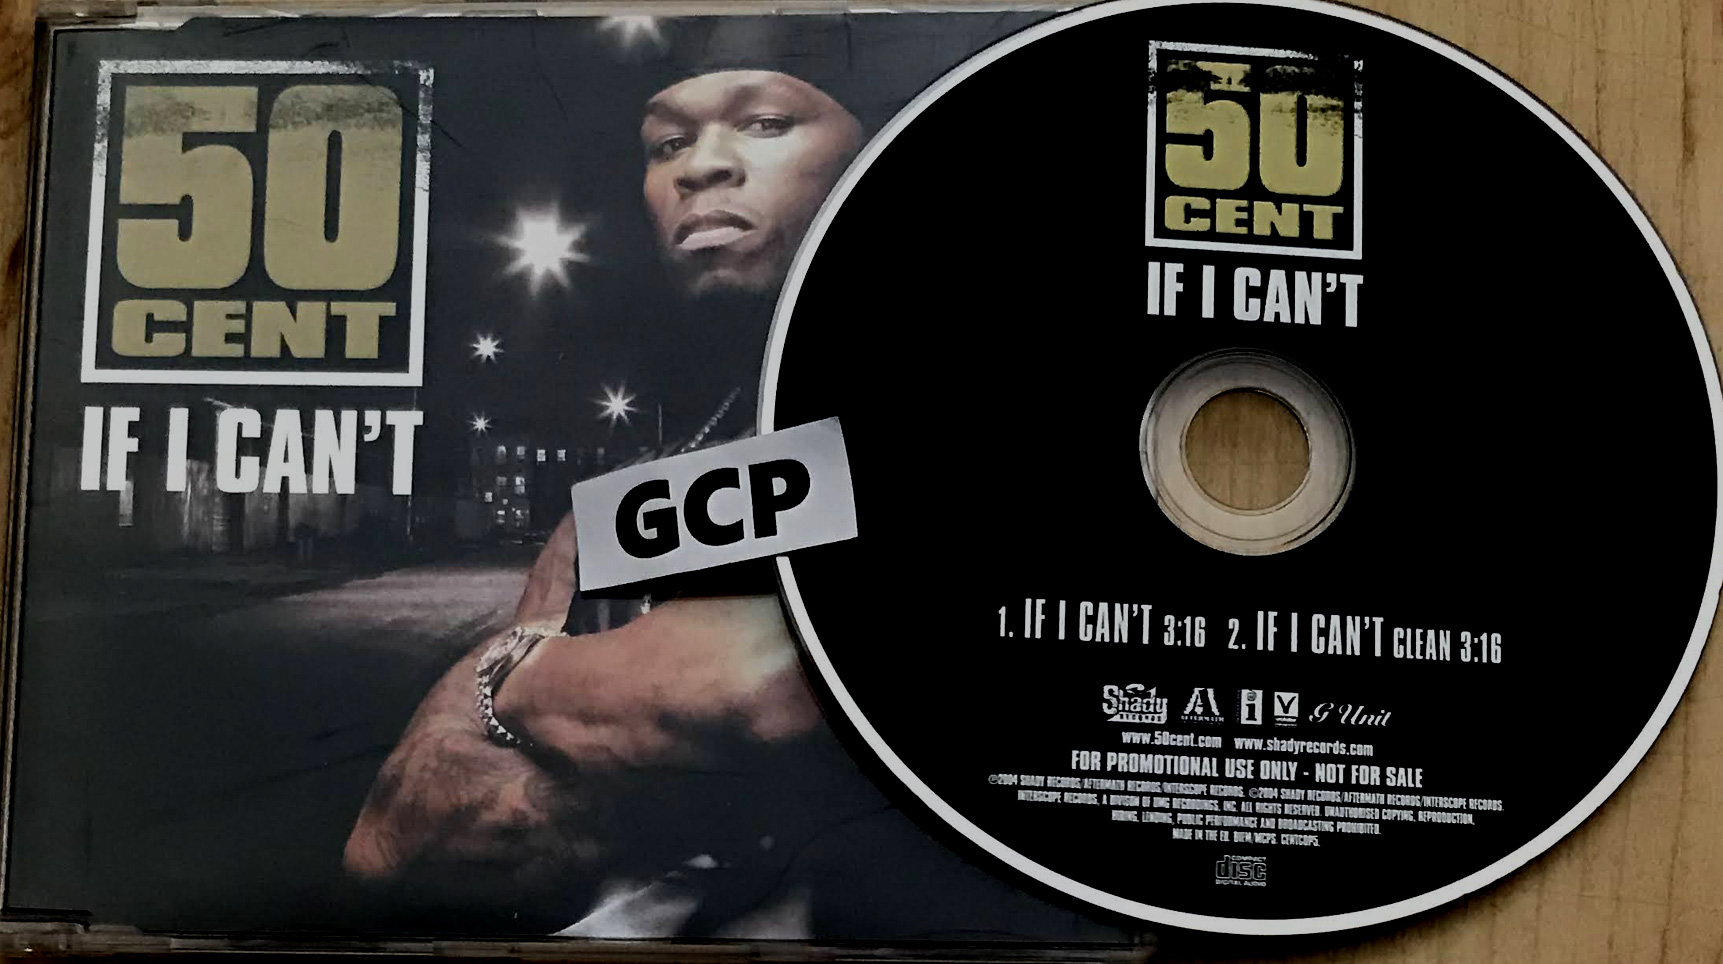 50_Cent-If_I_Cant-Promo_CDS-2004-GCP_INT 00-50_10